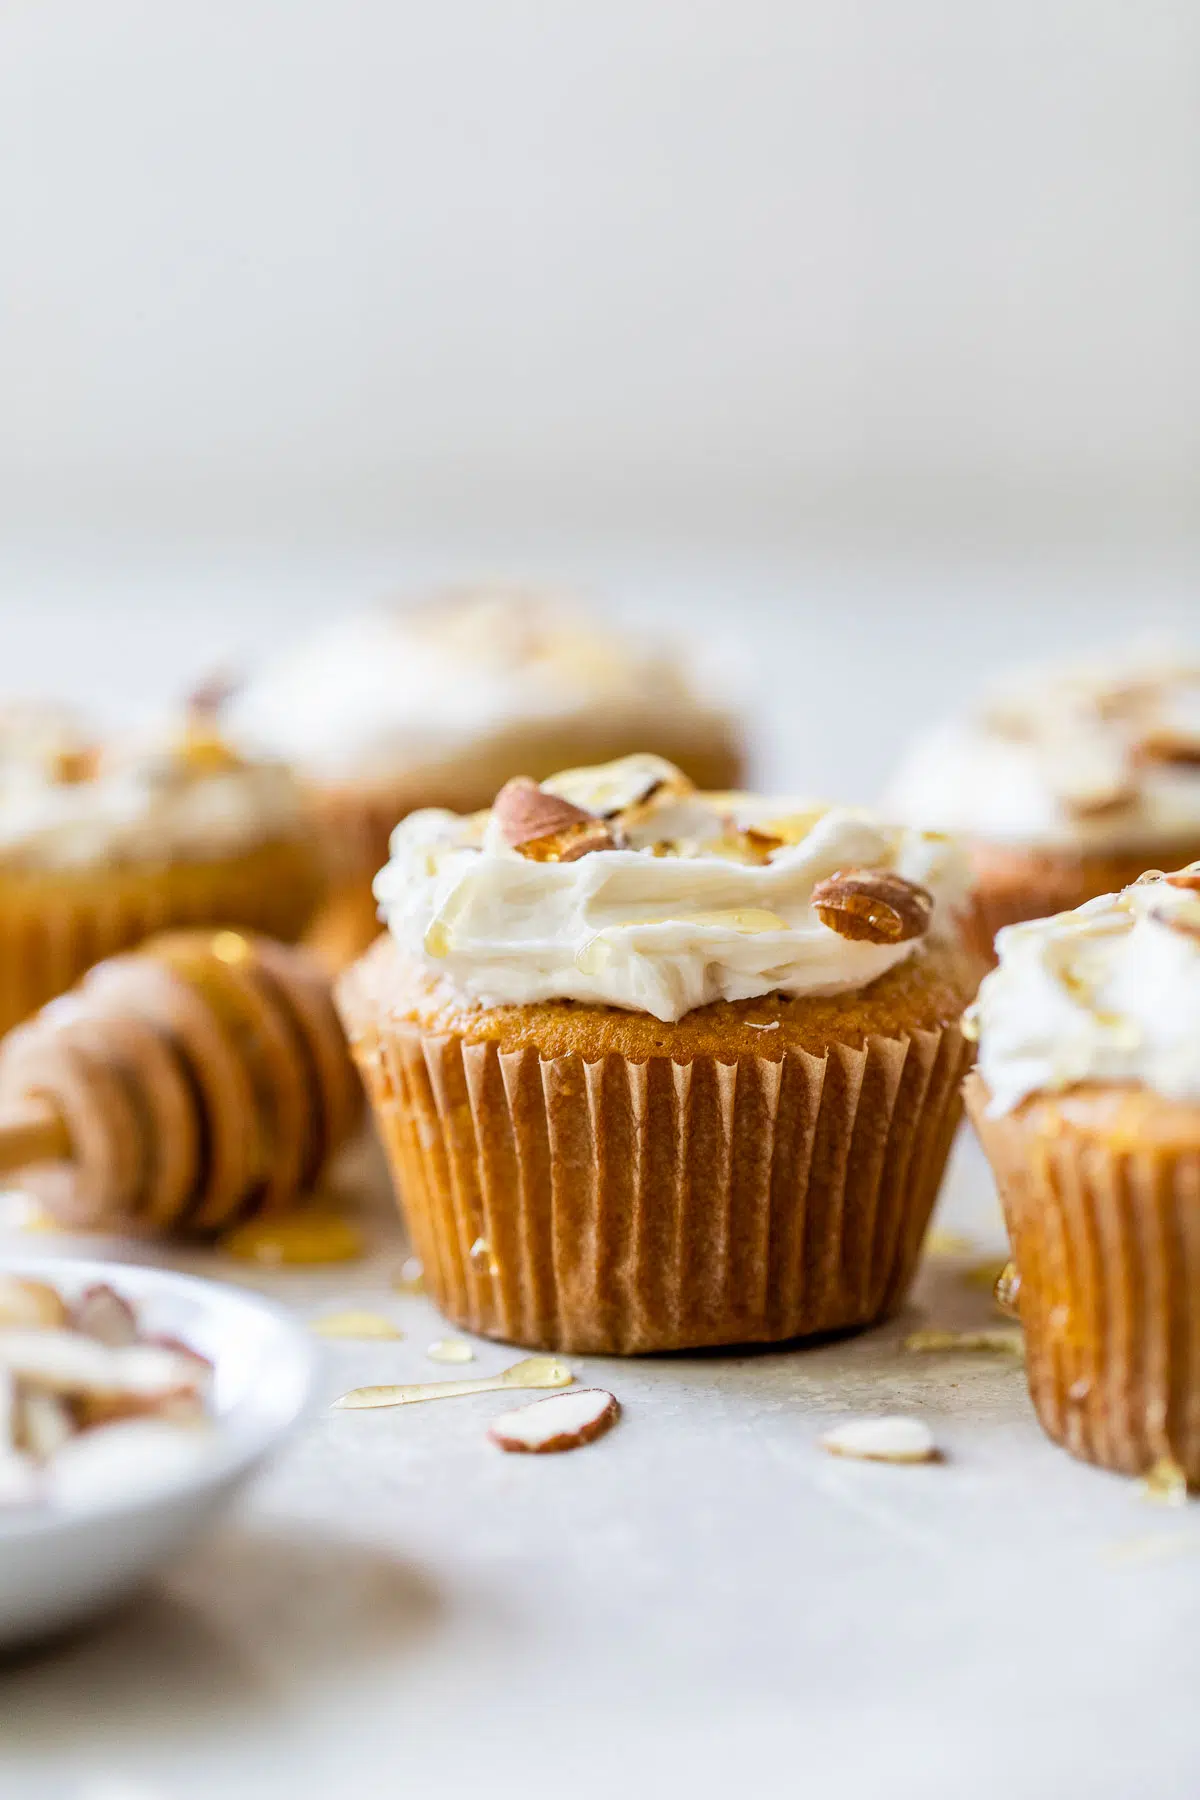 yellow cupcakes topped with white icing, sliced almonds and a drizzle of honey